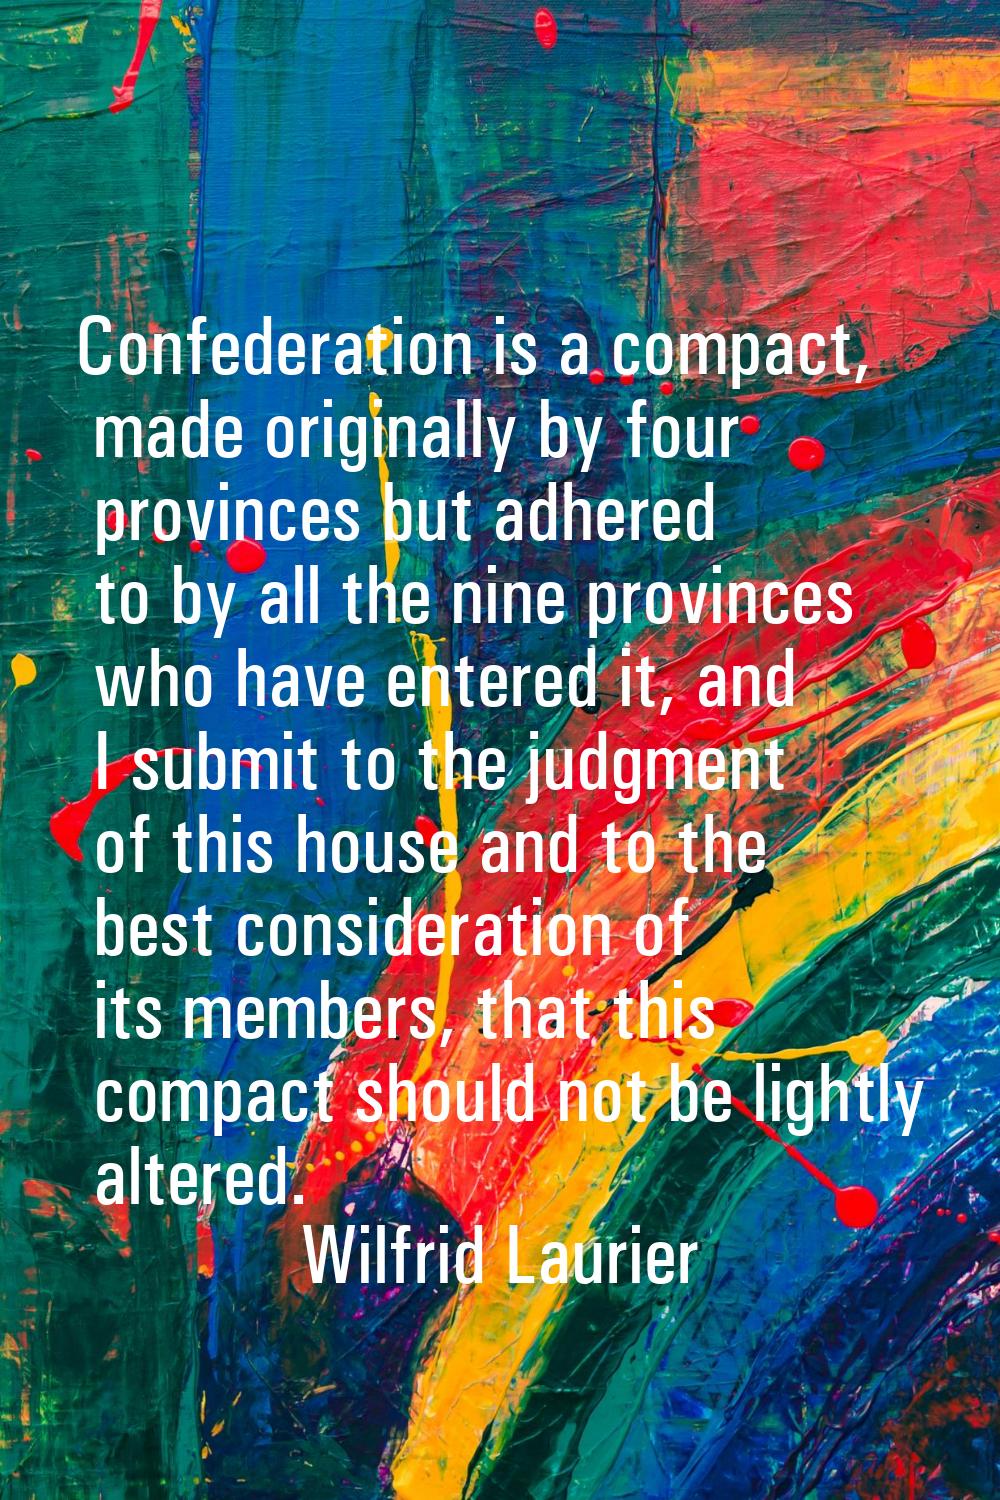 Confederation is a compact, made originally by four provinces but adhered to by all the nine provin